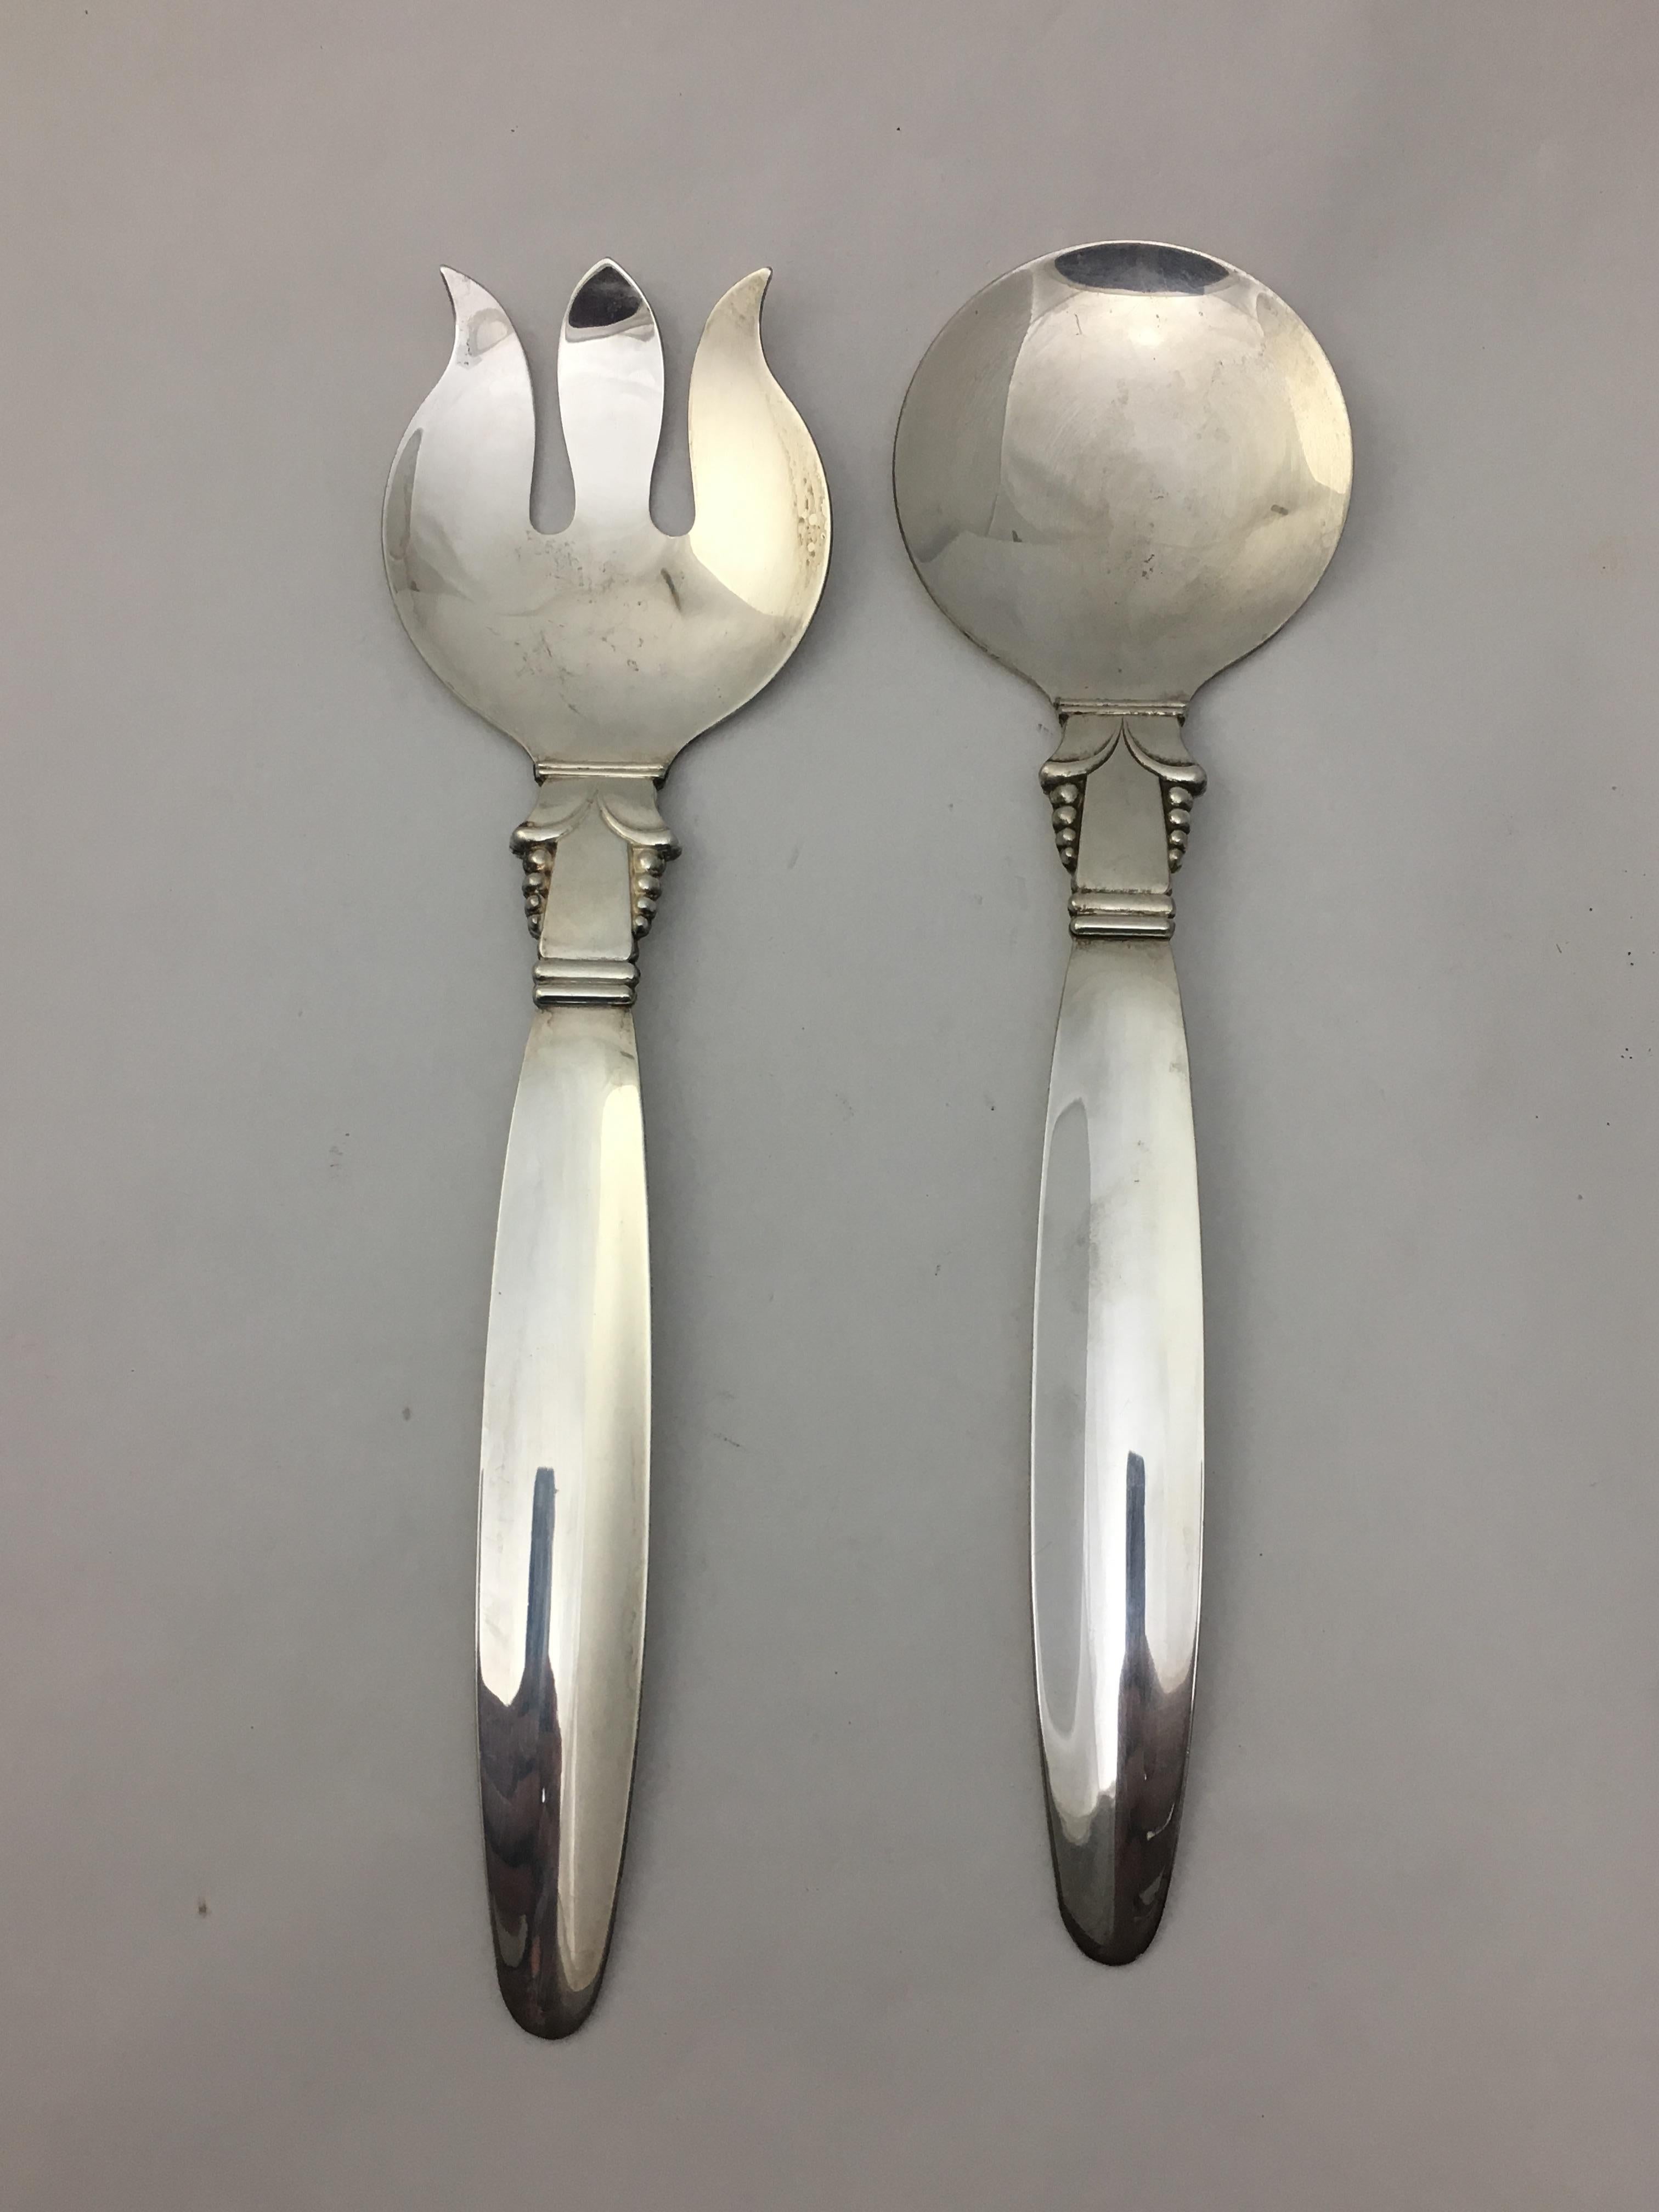 Georg Jensen style silver plate on copper modern serving fork and spoon, circa 1950. Signed on back, Original by A.L., silver/copper. Very good condition.

The fork measures 12.25